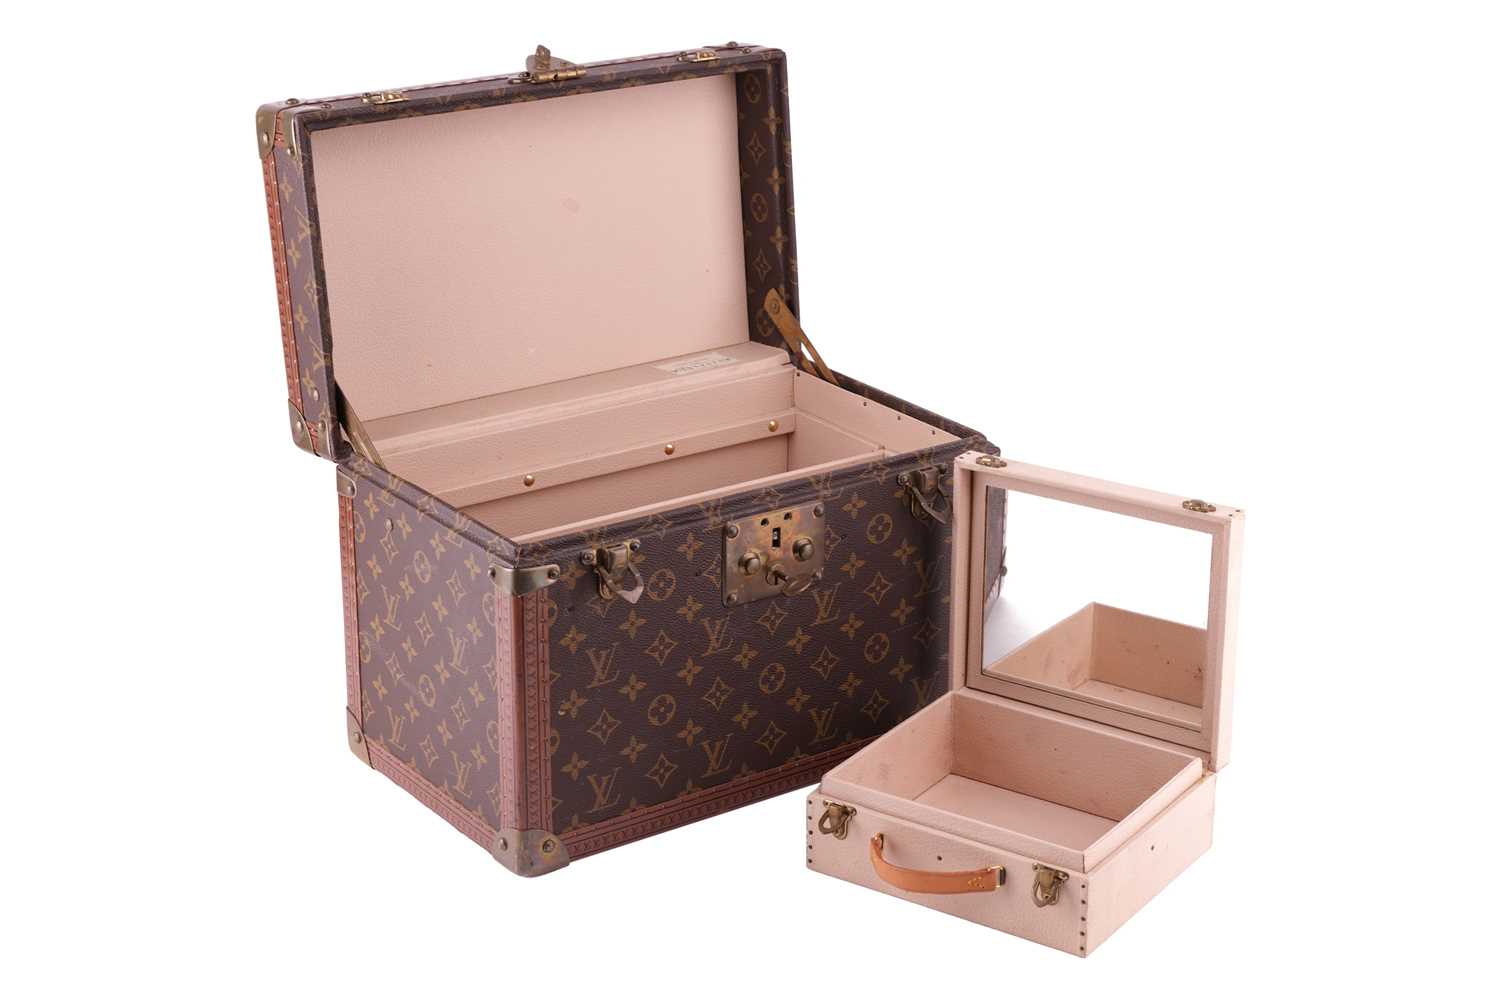 Louis Vuitton - a 'Boîte à Pharmacie' (pharmacy box) vanity case, in brown monogram canvas, brass lo - Image 11 of 15